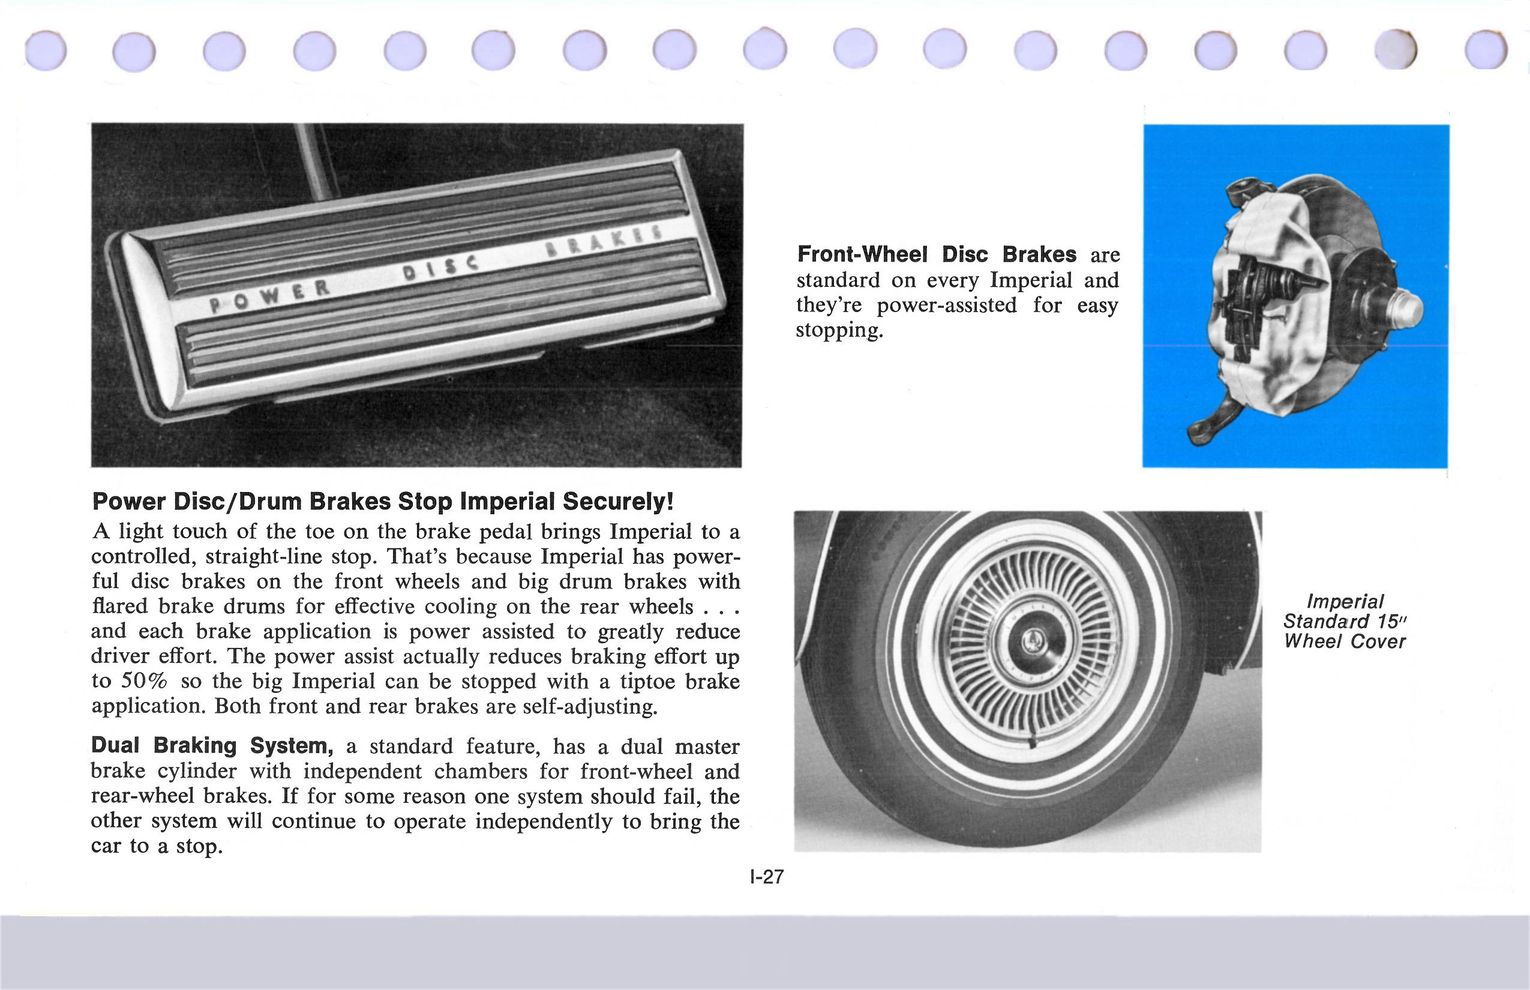 1969 Chrysler Data Book Page 21